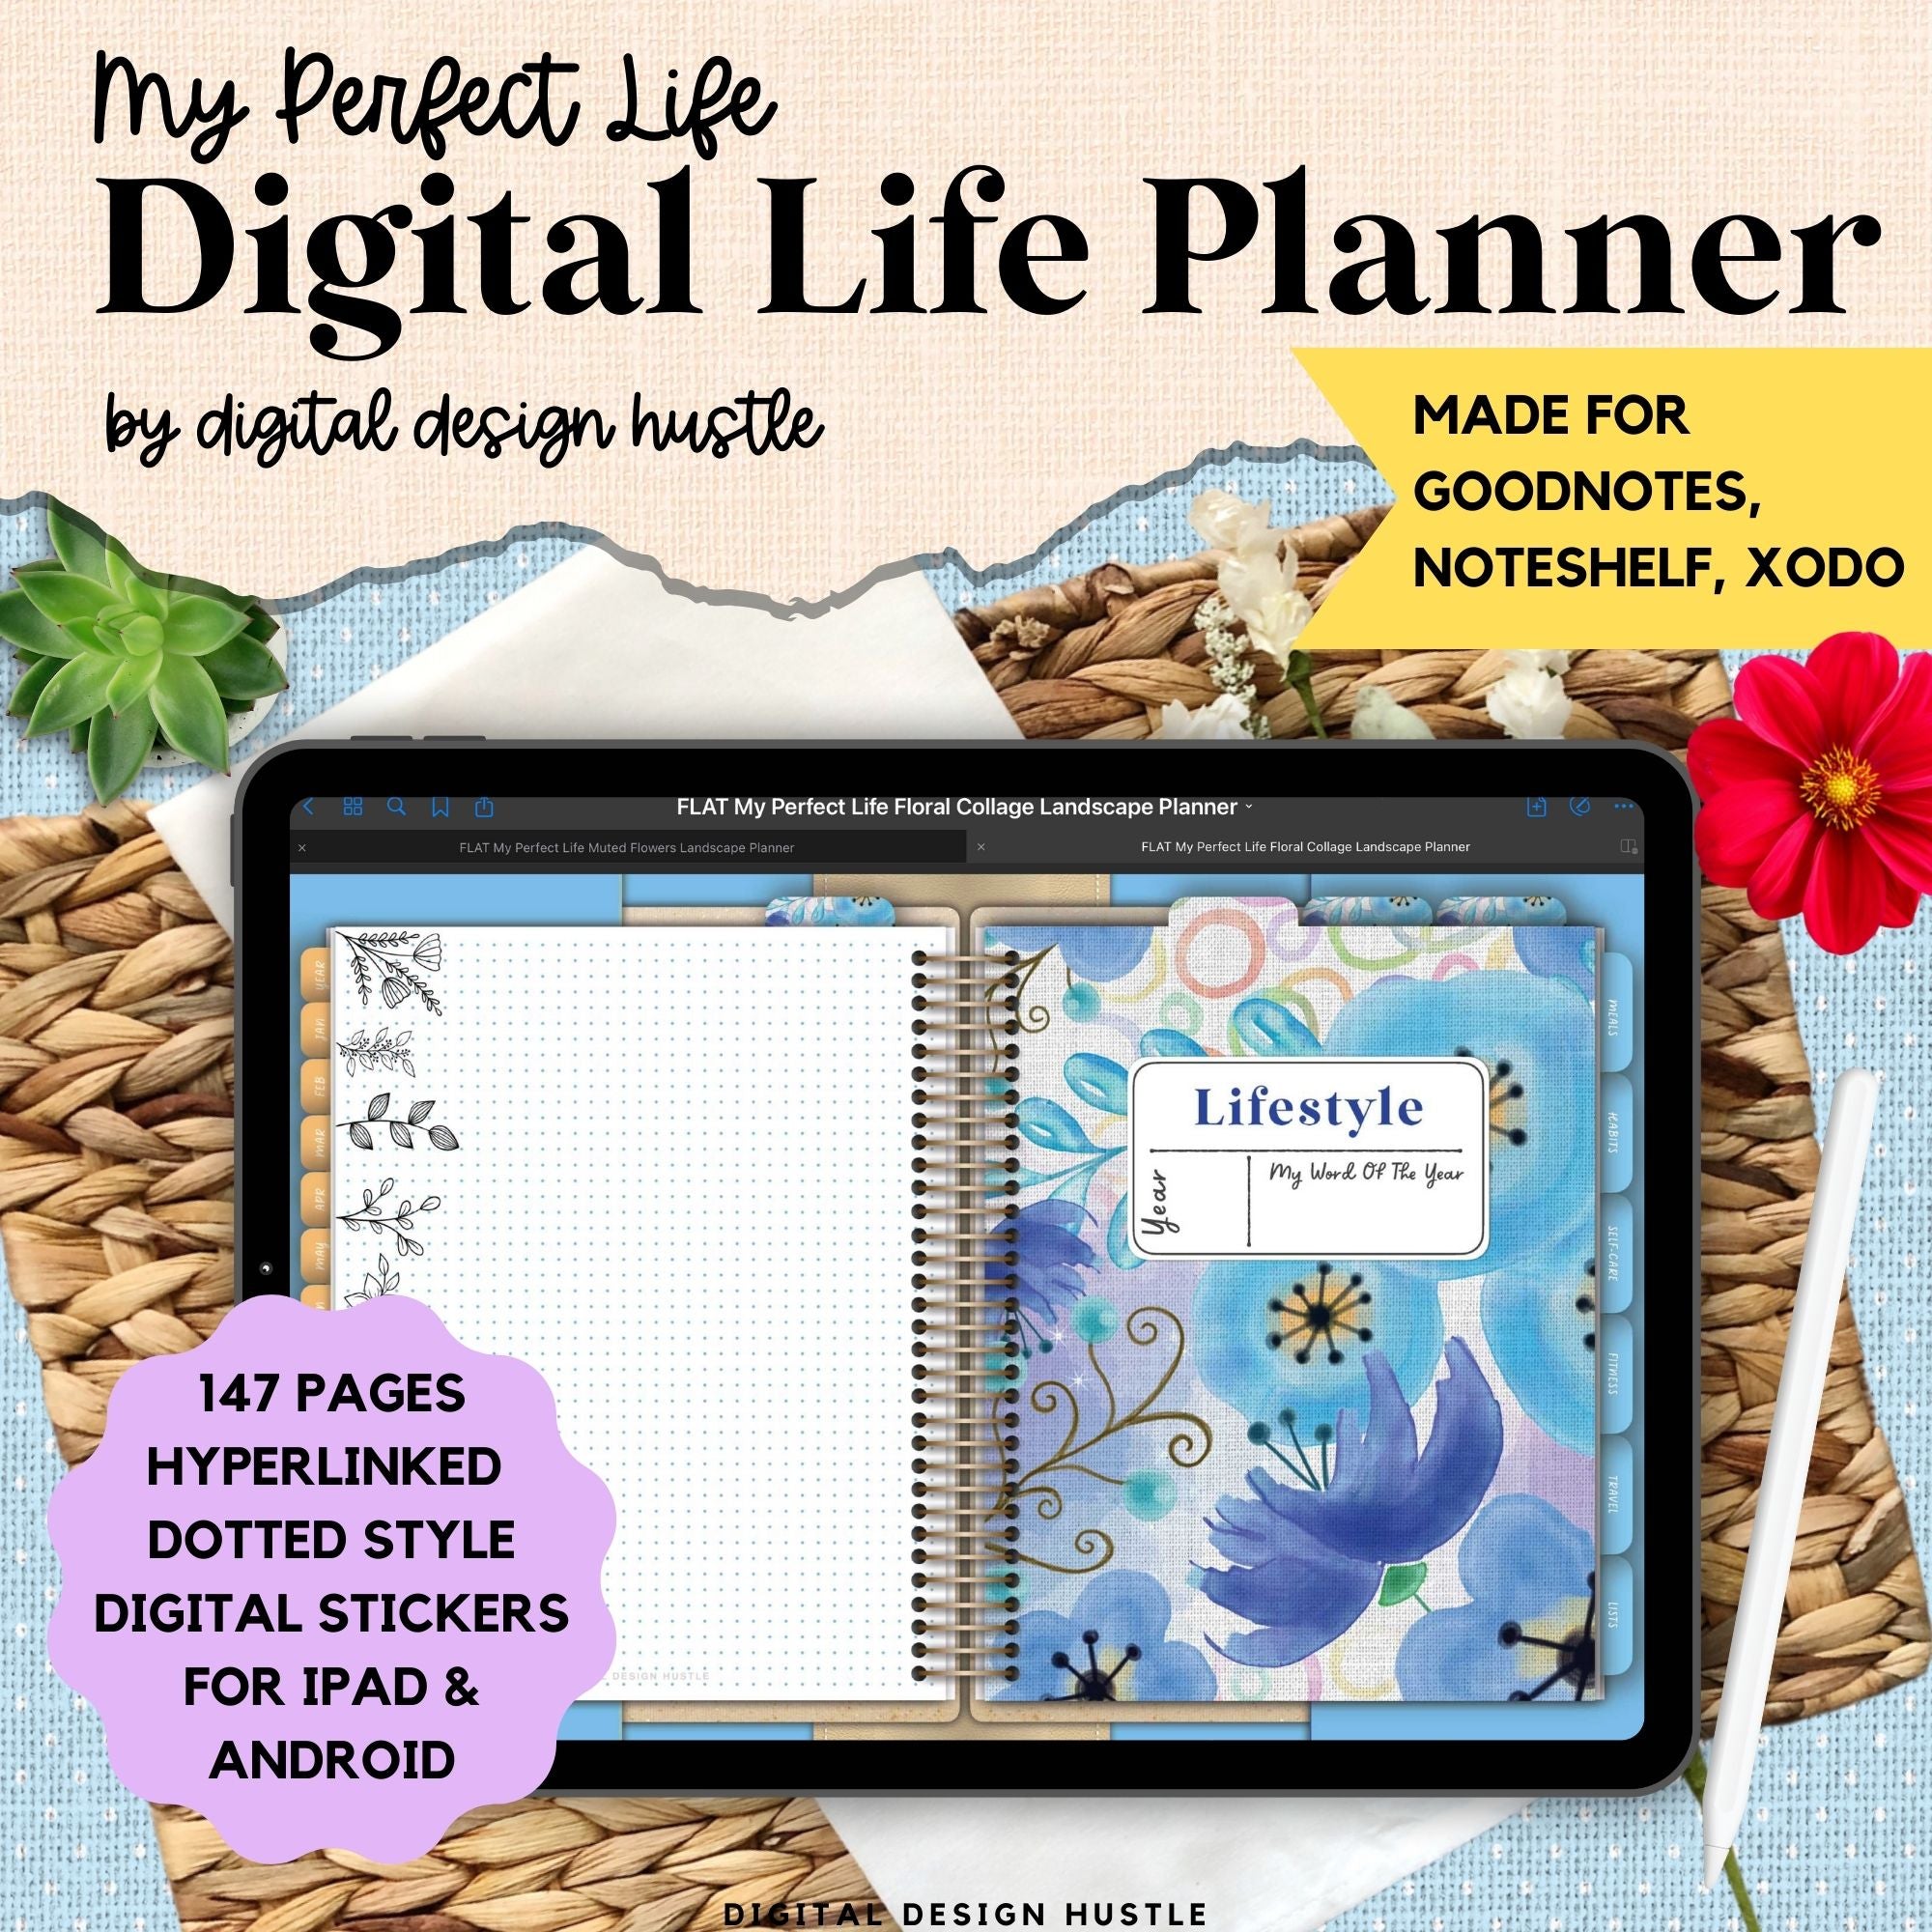 Plan your perfect day with this Blue Floral Collage Digital Landscape Planner With Digital Stickers. This undated digital planner has all the tools you need to get organized in your life. This All In One Digital Planner will help you focus on your yearly, monthly, weekly &amp; daily plans as well as goals, finances, lifestyle, wellness, business, mindset and more. This makes a great parent planner for busy moms who want to stay organized.